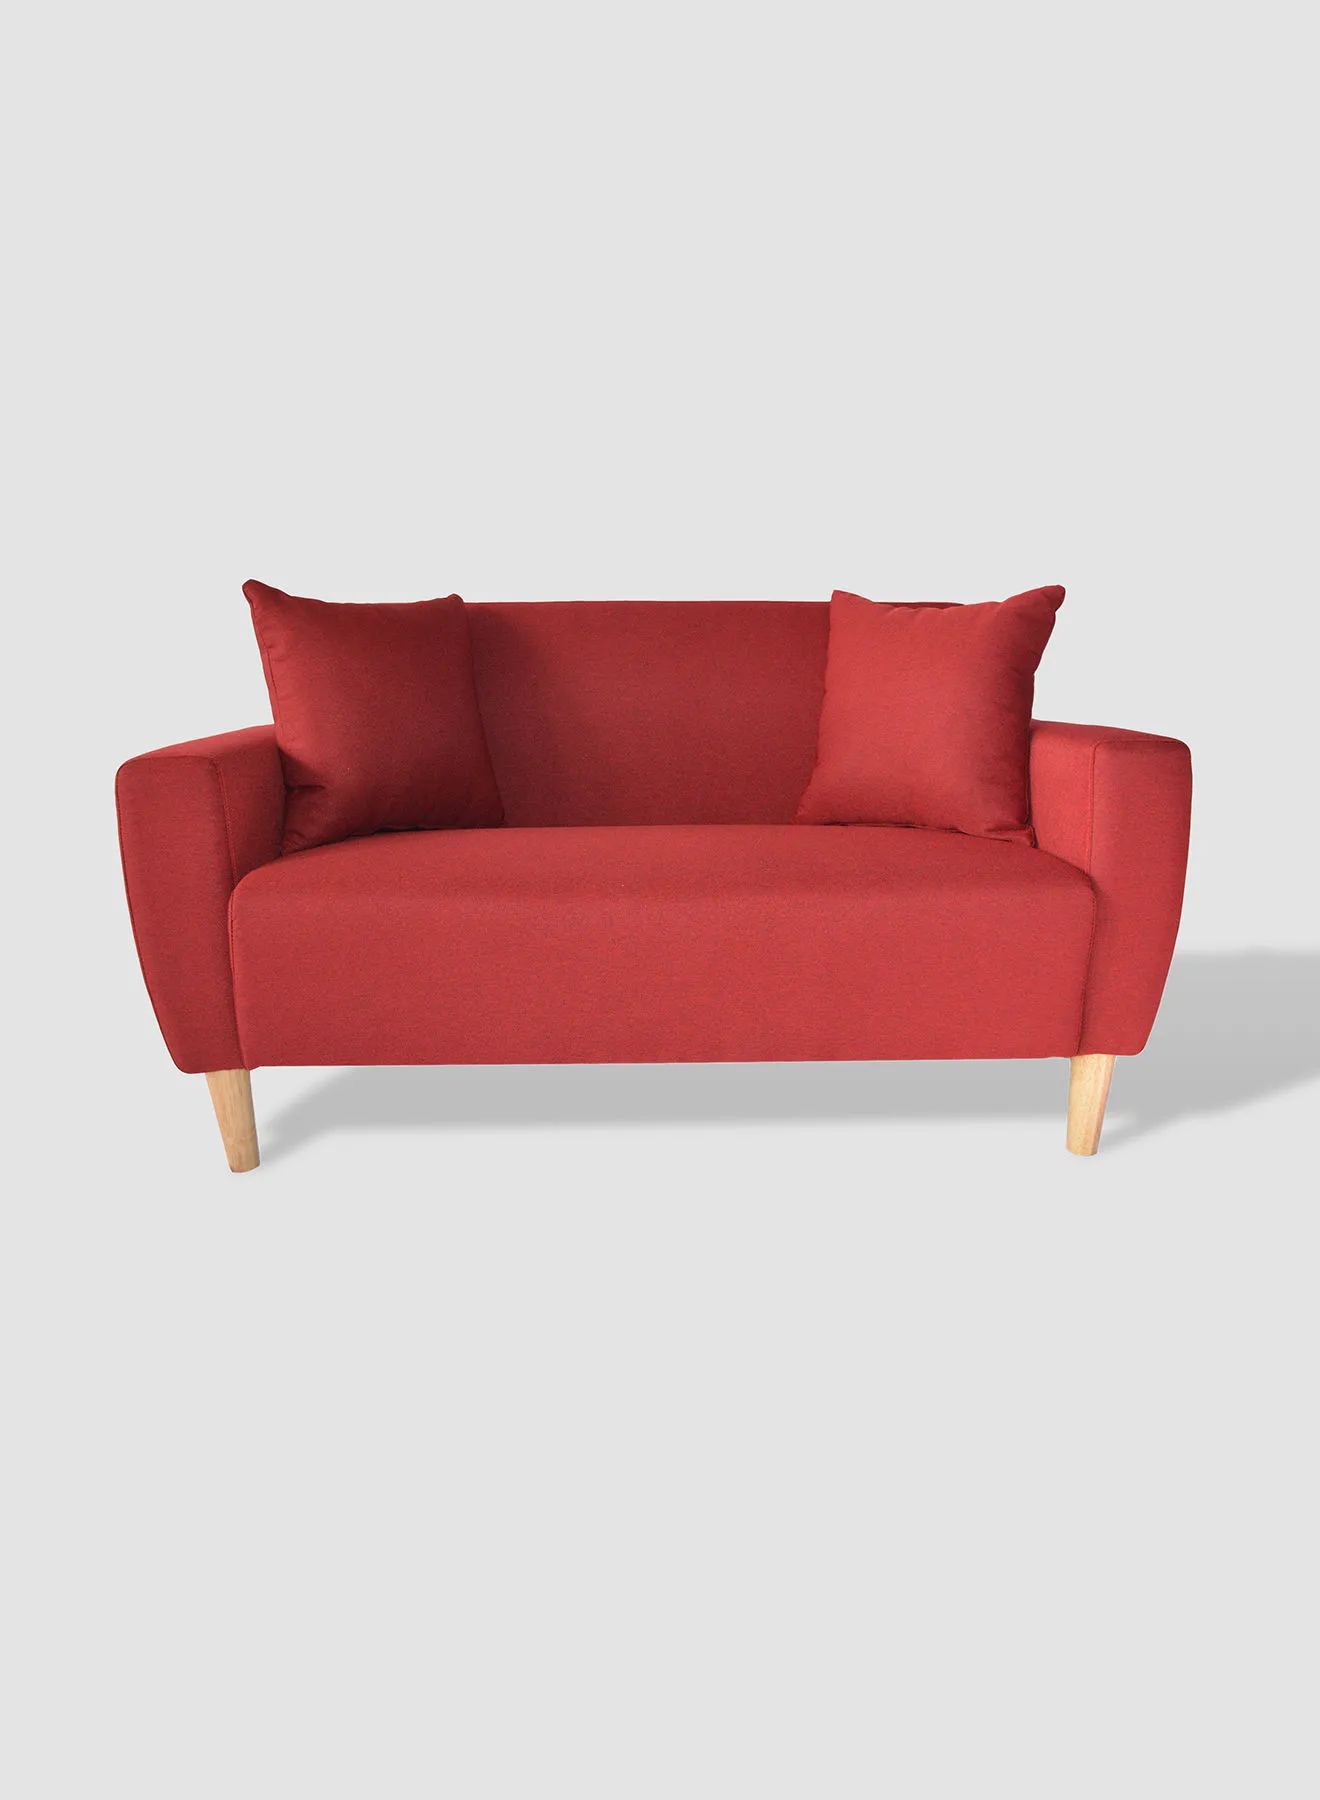 Amal Sofa Economical - Red Couch - 130 X 68 X 70 - 2 Seater Sofa Relaxing Sofa